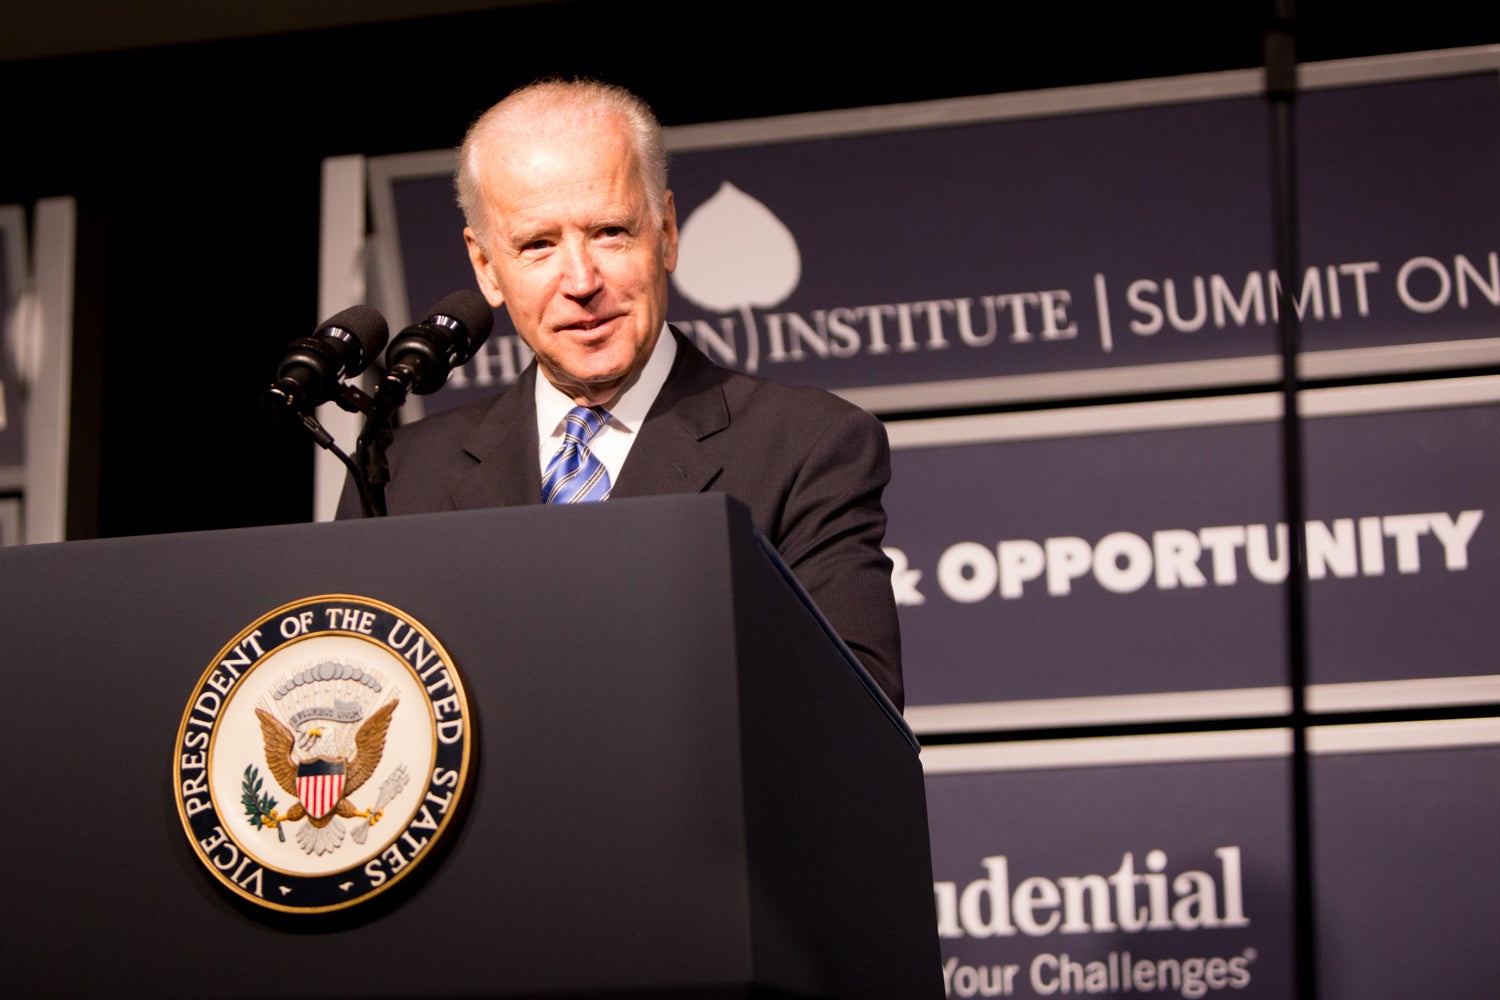 Joe Biden at the Summit on Inequality and Opportunity